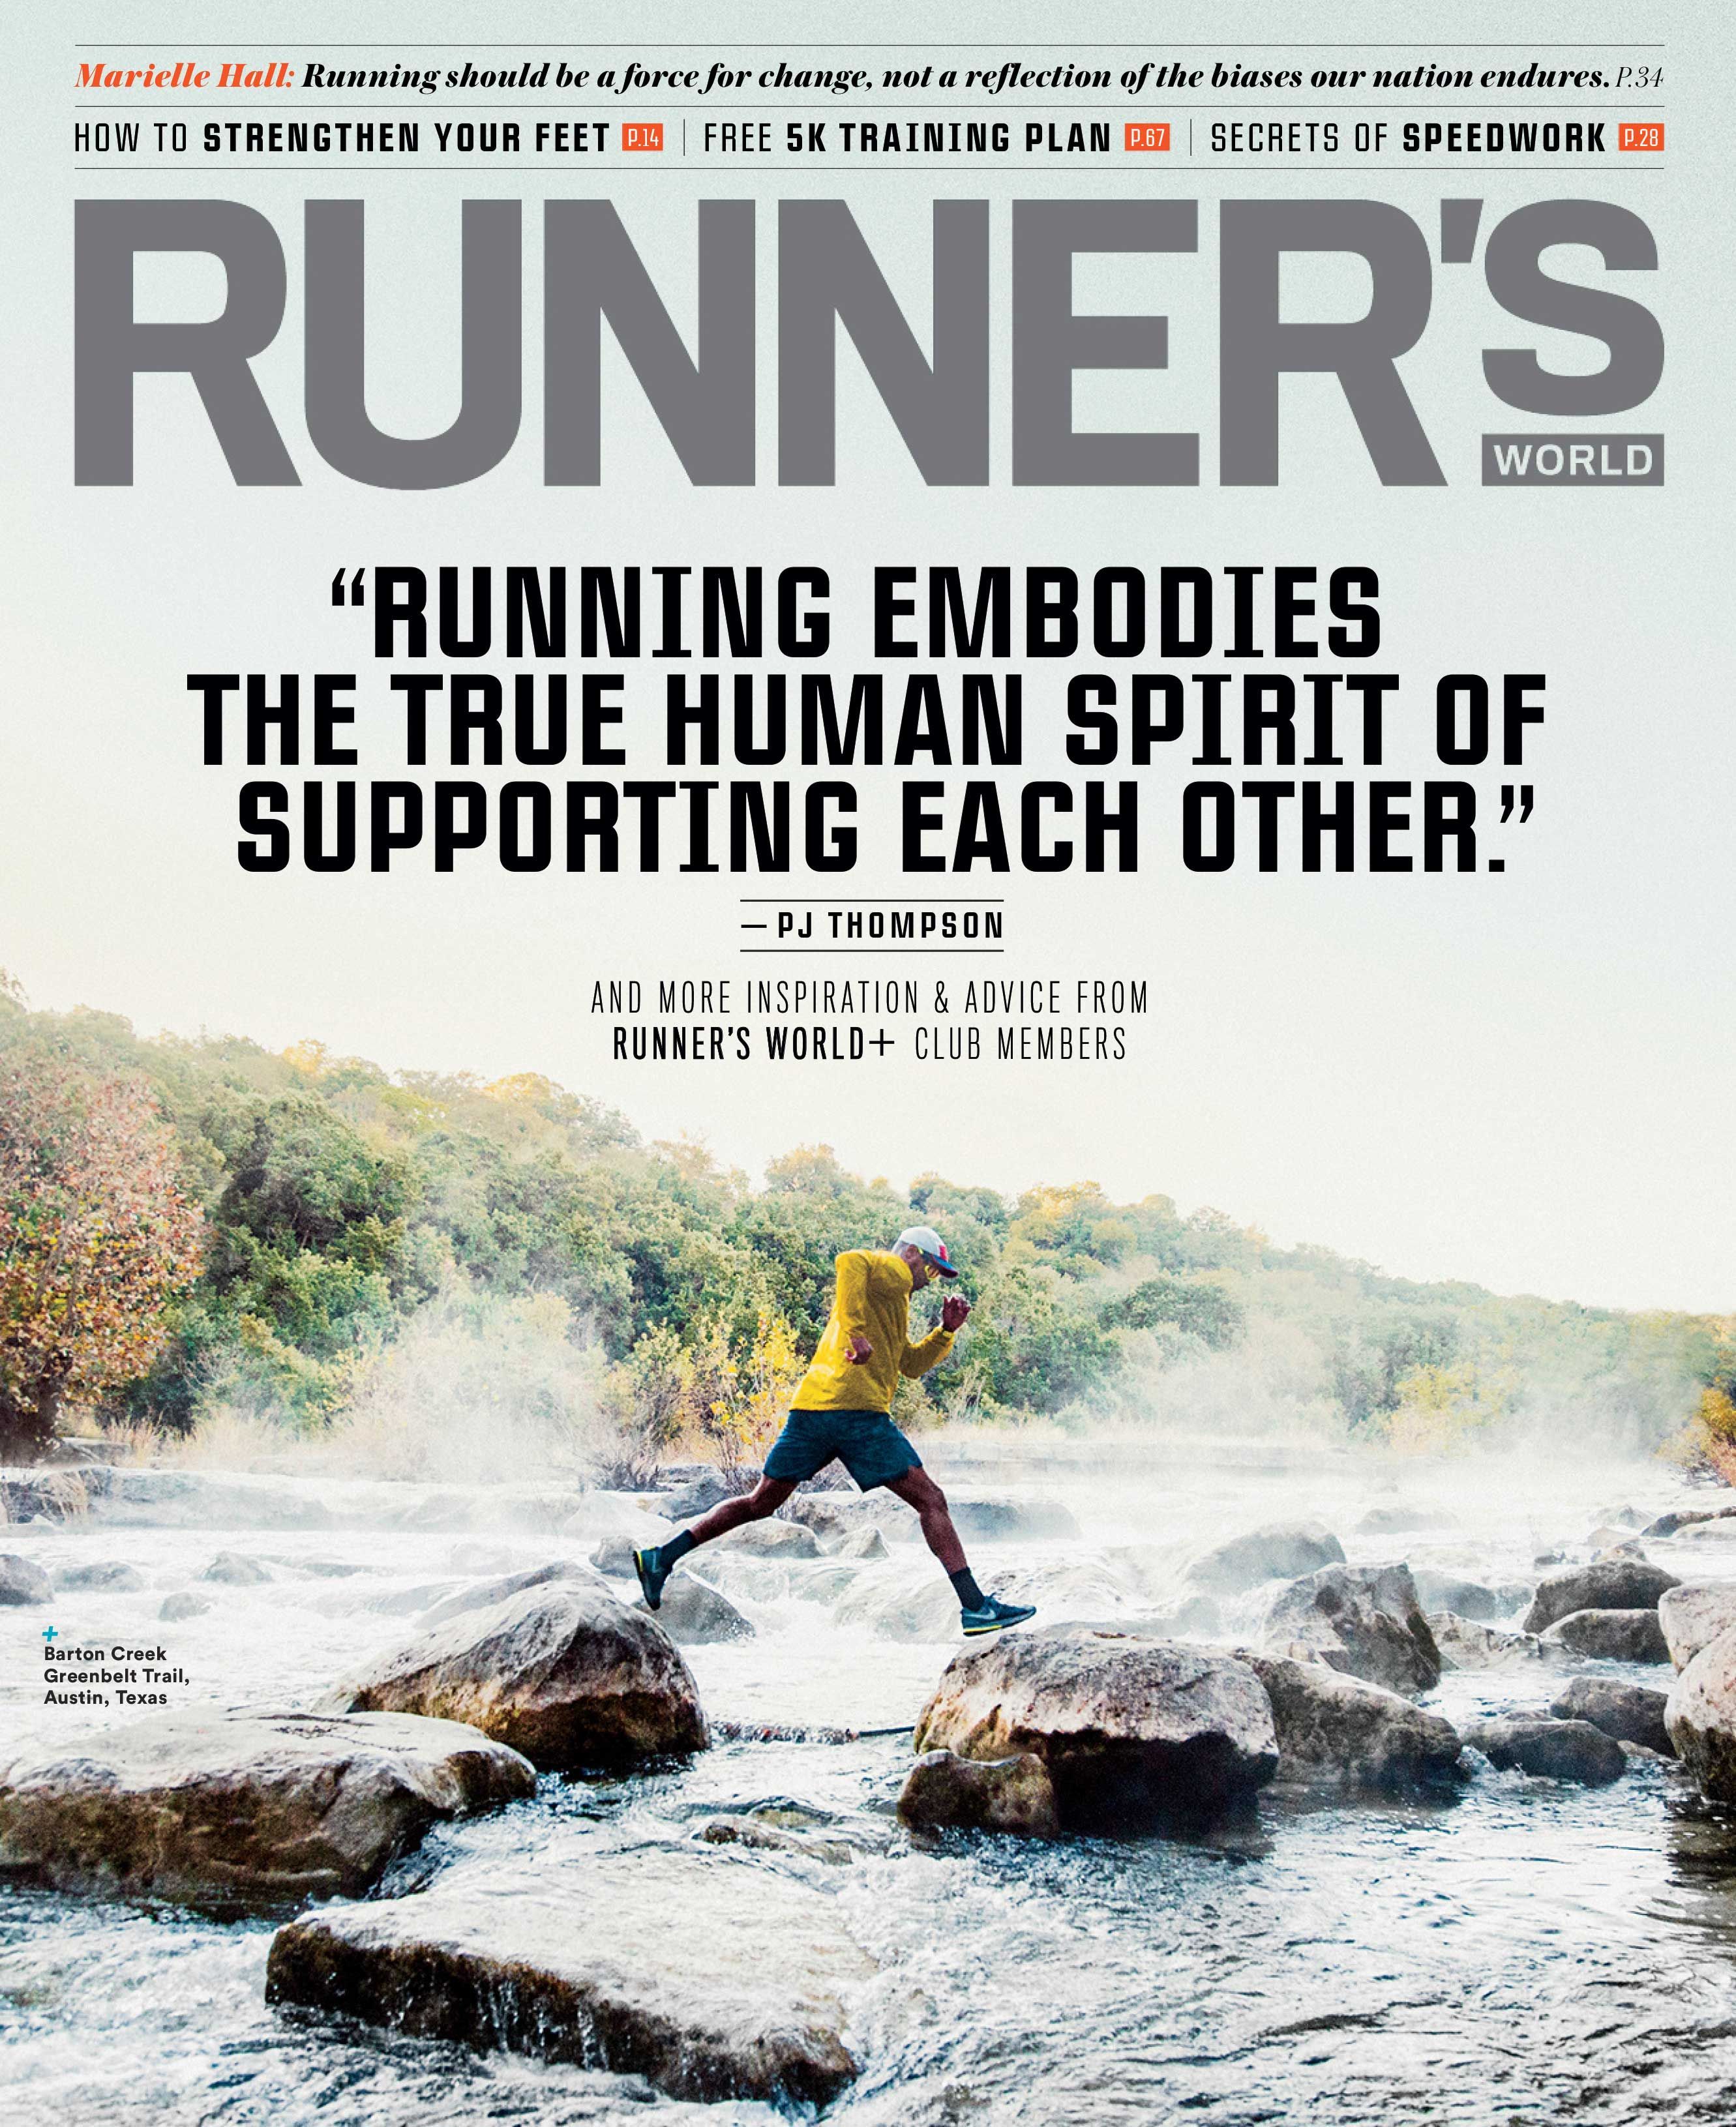 RW+ Gives You the Tools to Run Your Best!